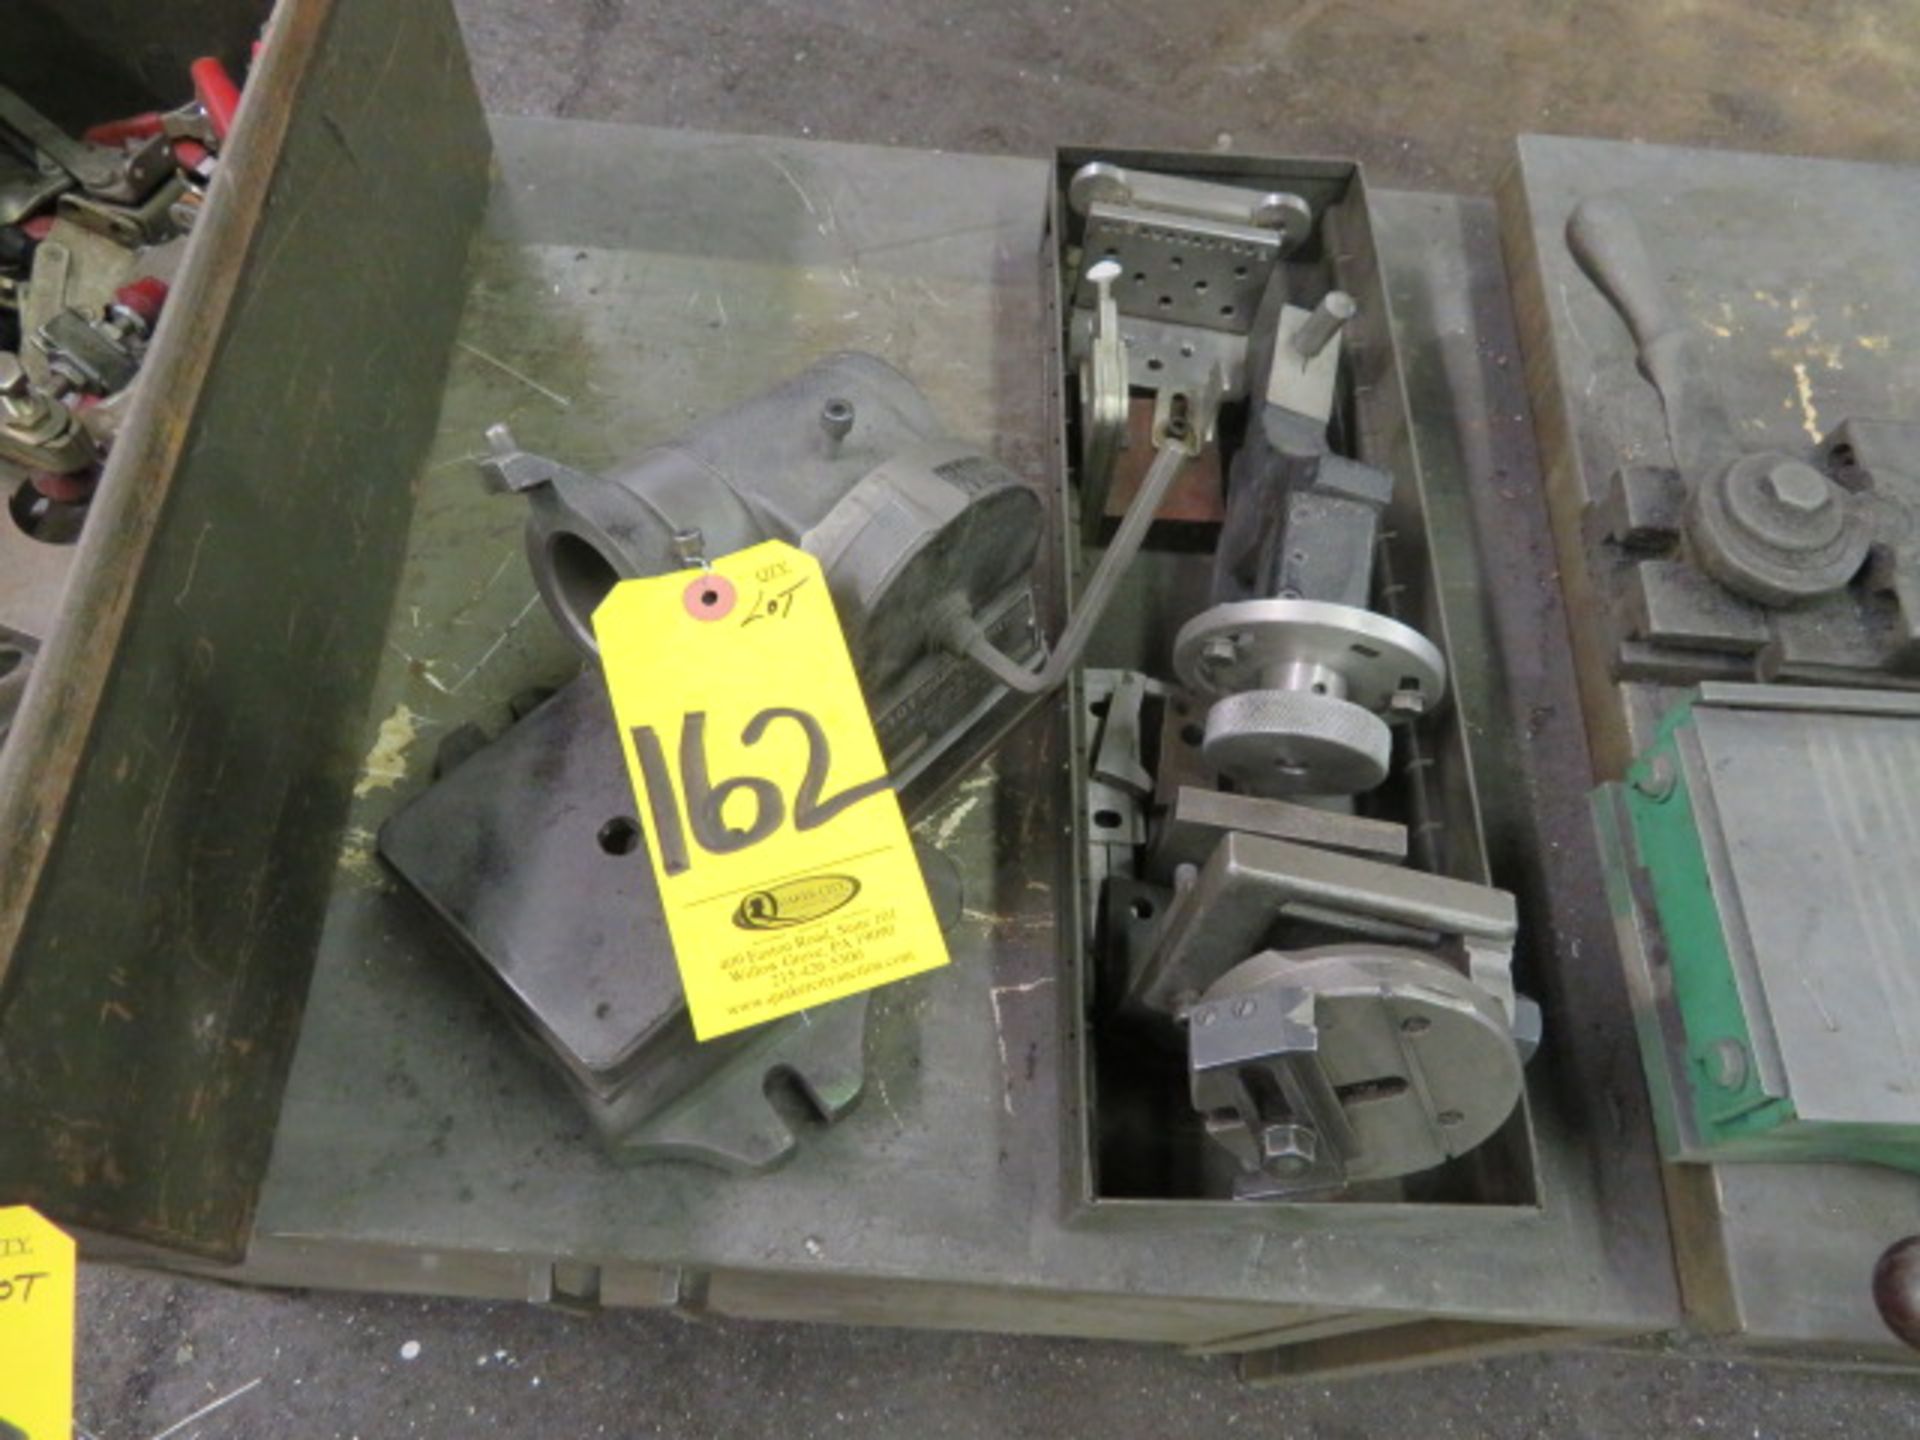 BMC PC-101 SHARPENING FIXTURE, DRESSOR AND MISC. FIXTURES - Image 2 of 2